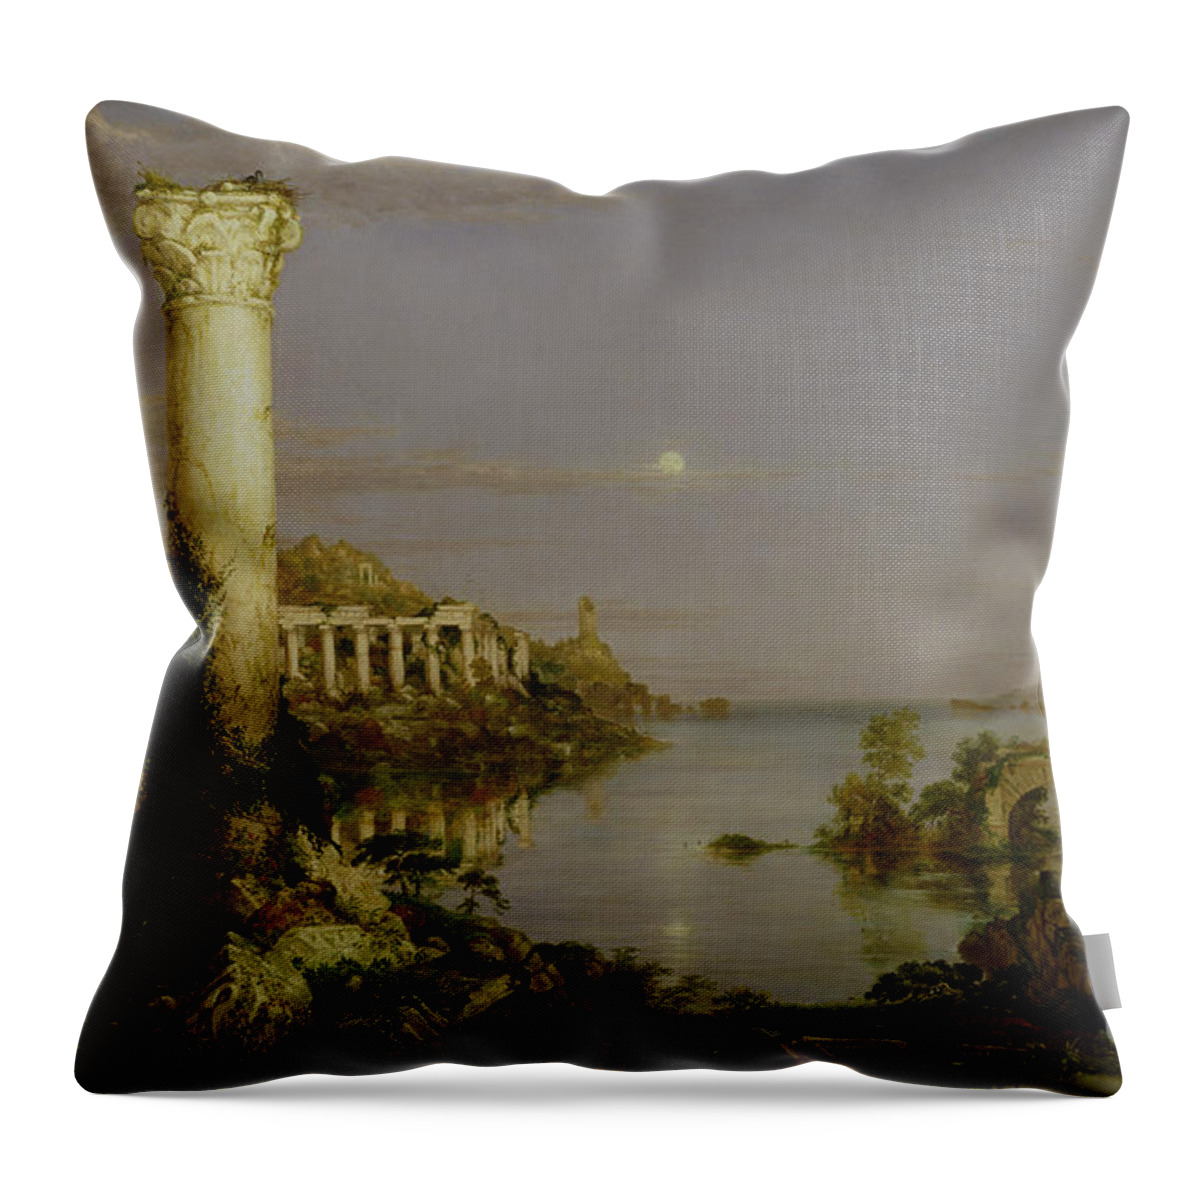 Moonlit Landscape; Classical; Architecture; Ruin; Ruins; Desolate; Bridge; Column; Hudson River School; Moon Throw Pillow featuring the painting The Course of Empire - Desolation by Thomas Cole